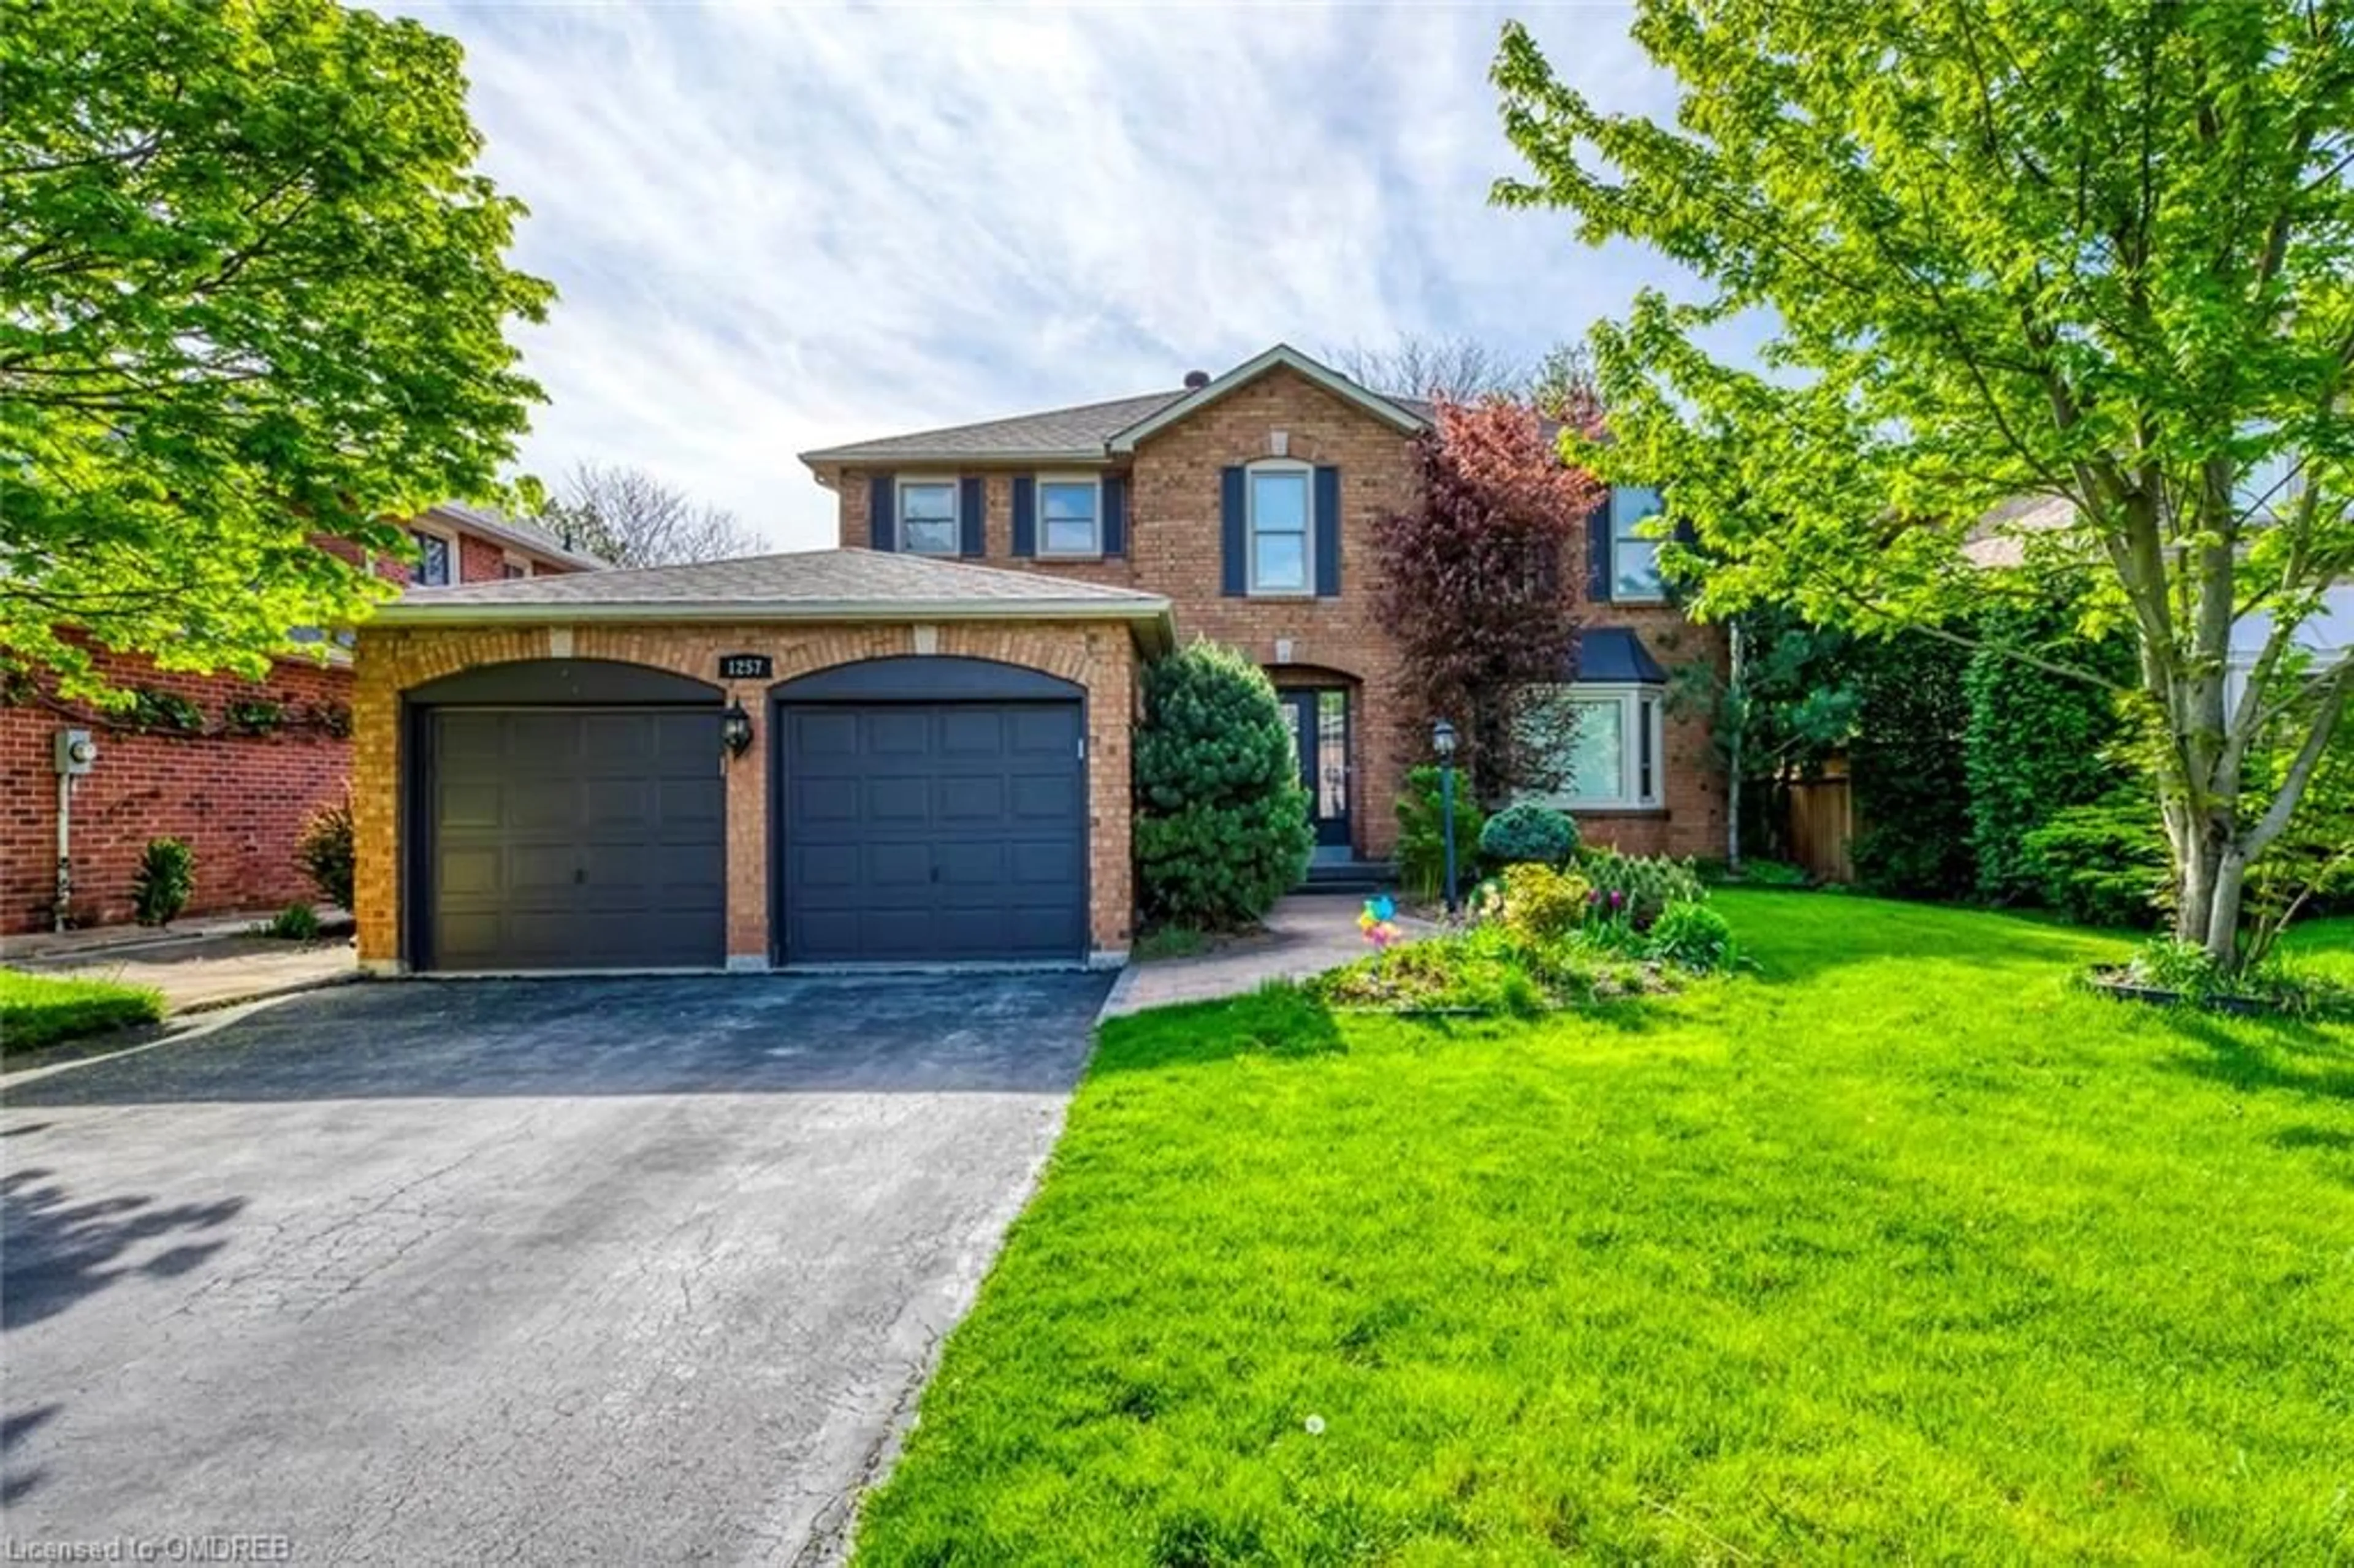 Home with brick exterior material for 1257 Windrush Dr, Oakville Ontario L6M 1V2